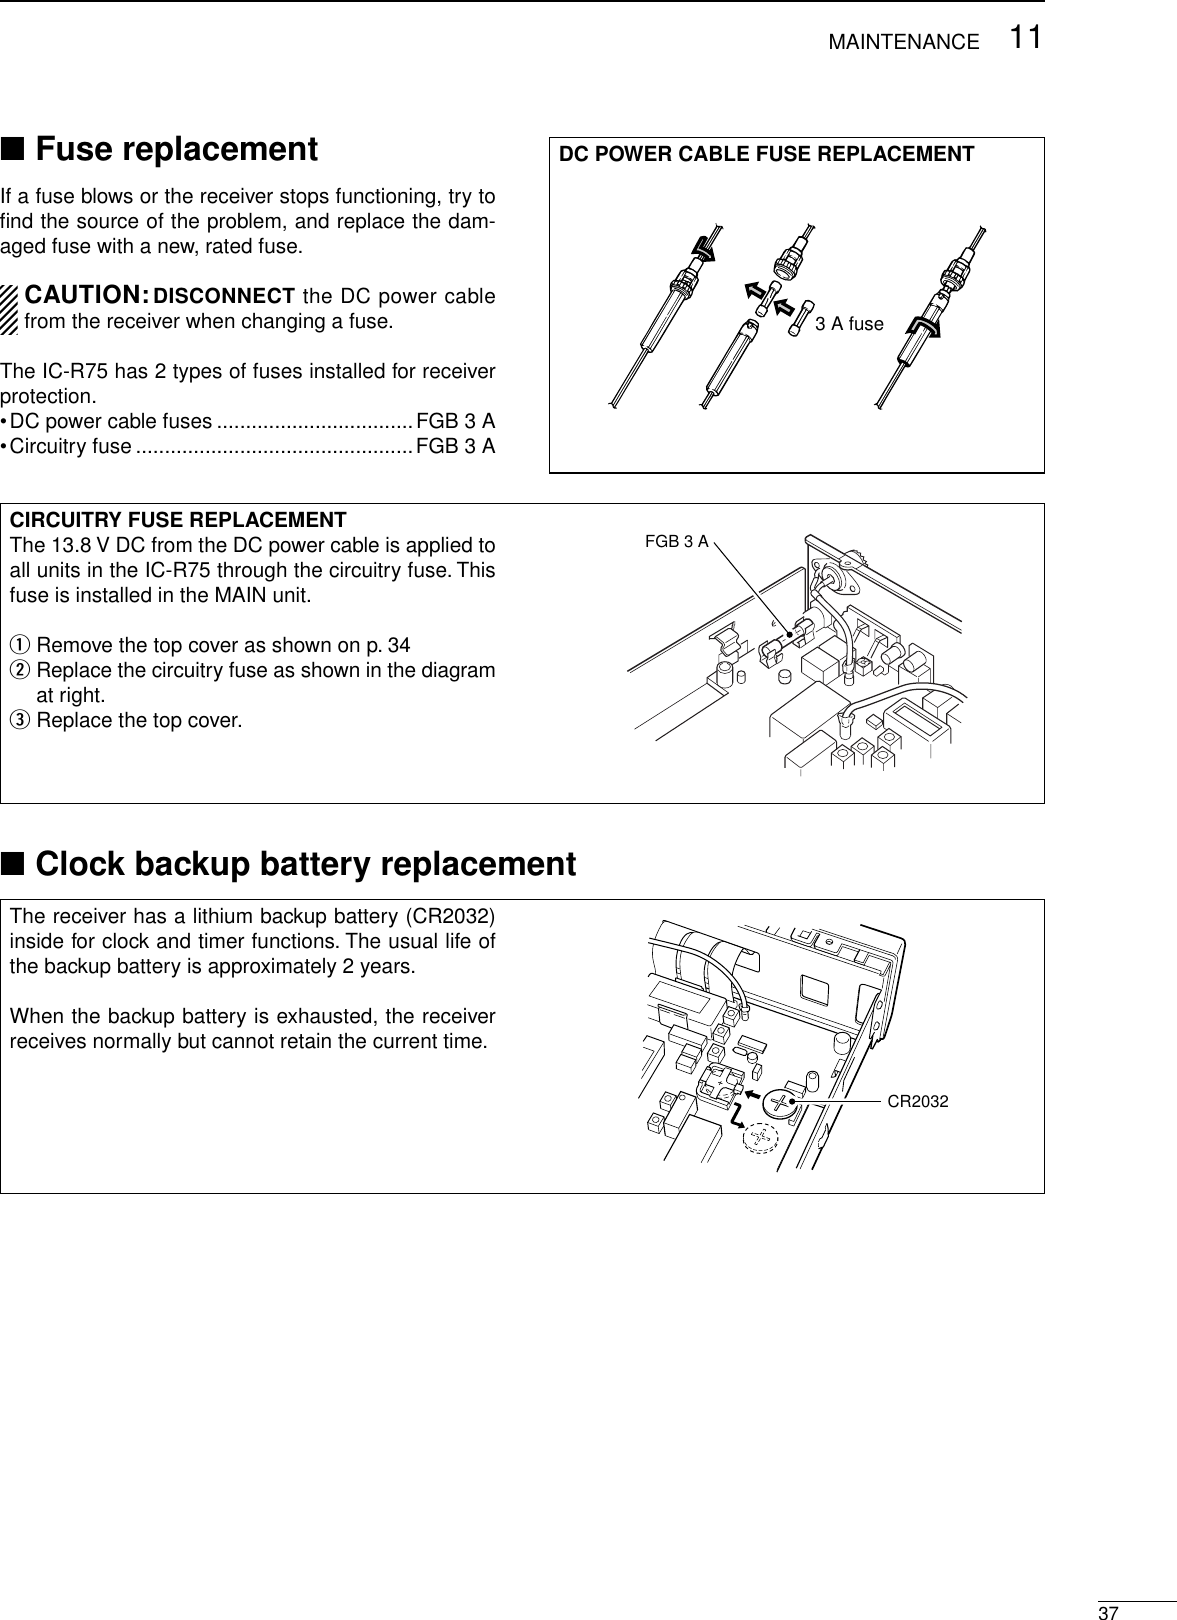 3711MAINTENANCECIRCUITRY FUSE REPLACEMENTThe 13.8 V DC from the DC power cable is applied toall units in the IC-R75 through the circuitry fuse. Thisfuse is installed in the MAIN unit.qRemove the top cover as shown on p. 34wReplace the circuitry fuse as shown in the diagramat right.eReplace the top cover.FGB 3 A■Fuse replacementIf a fuse blows or the receiver stops functioning, try toﬁnd the source of the problem, and replace the dam-aged fuse with a new, rated fuse.CAUTION:DISCONNECT the DC power cablefrom the receiver when changing a fuse.The IC-R75 has 2 types of fuses installed for receiverprotection.•DC power cable fuses ..................................FGB 3 A•Circuitry fuse ................................................FGB 3 ADC POWER CABLE FUSE REPLACEMENT3 A fuse■Clock backup battery replacementThe receiver has a lithium backup battery (CR2032)inside for clock and timer functions. The usual life ofthe backup battery is approximately 2 years.When the backup battery is exhausted, the receiverreceives normally but cannot retain the current time.CR2032